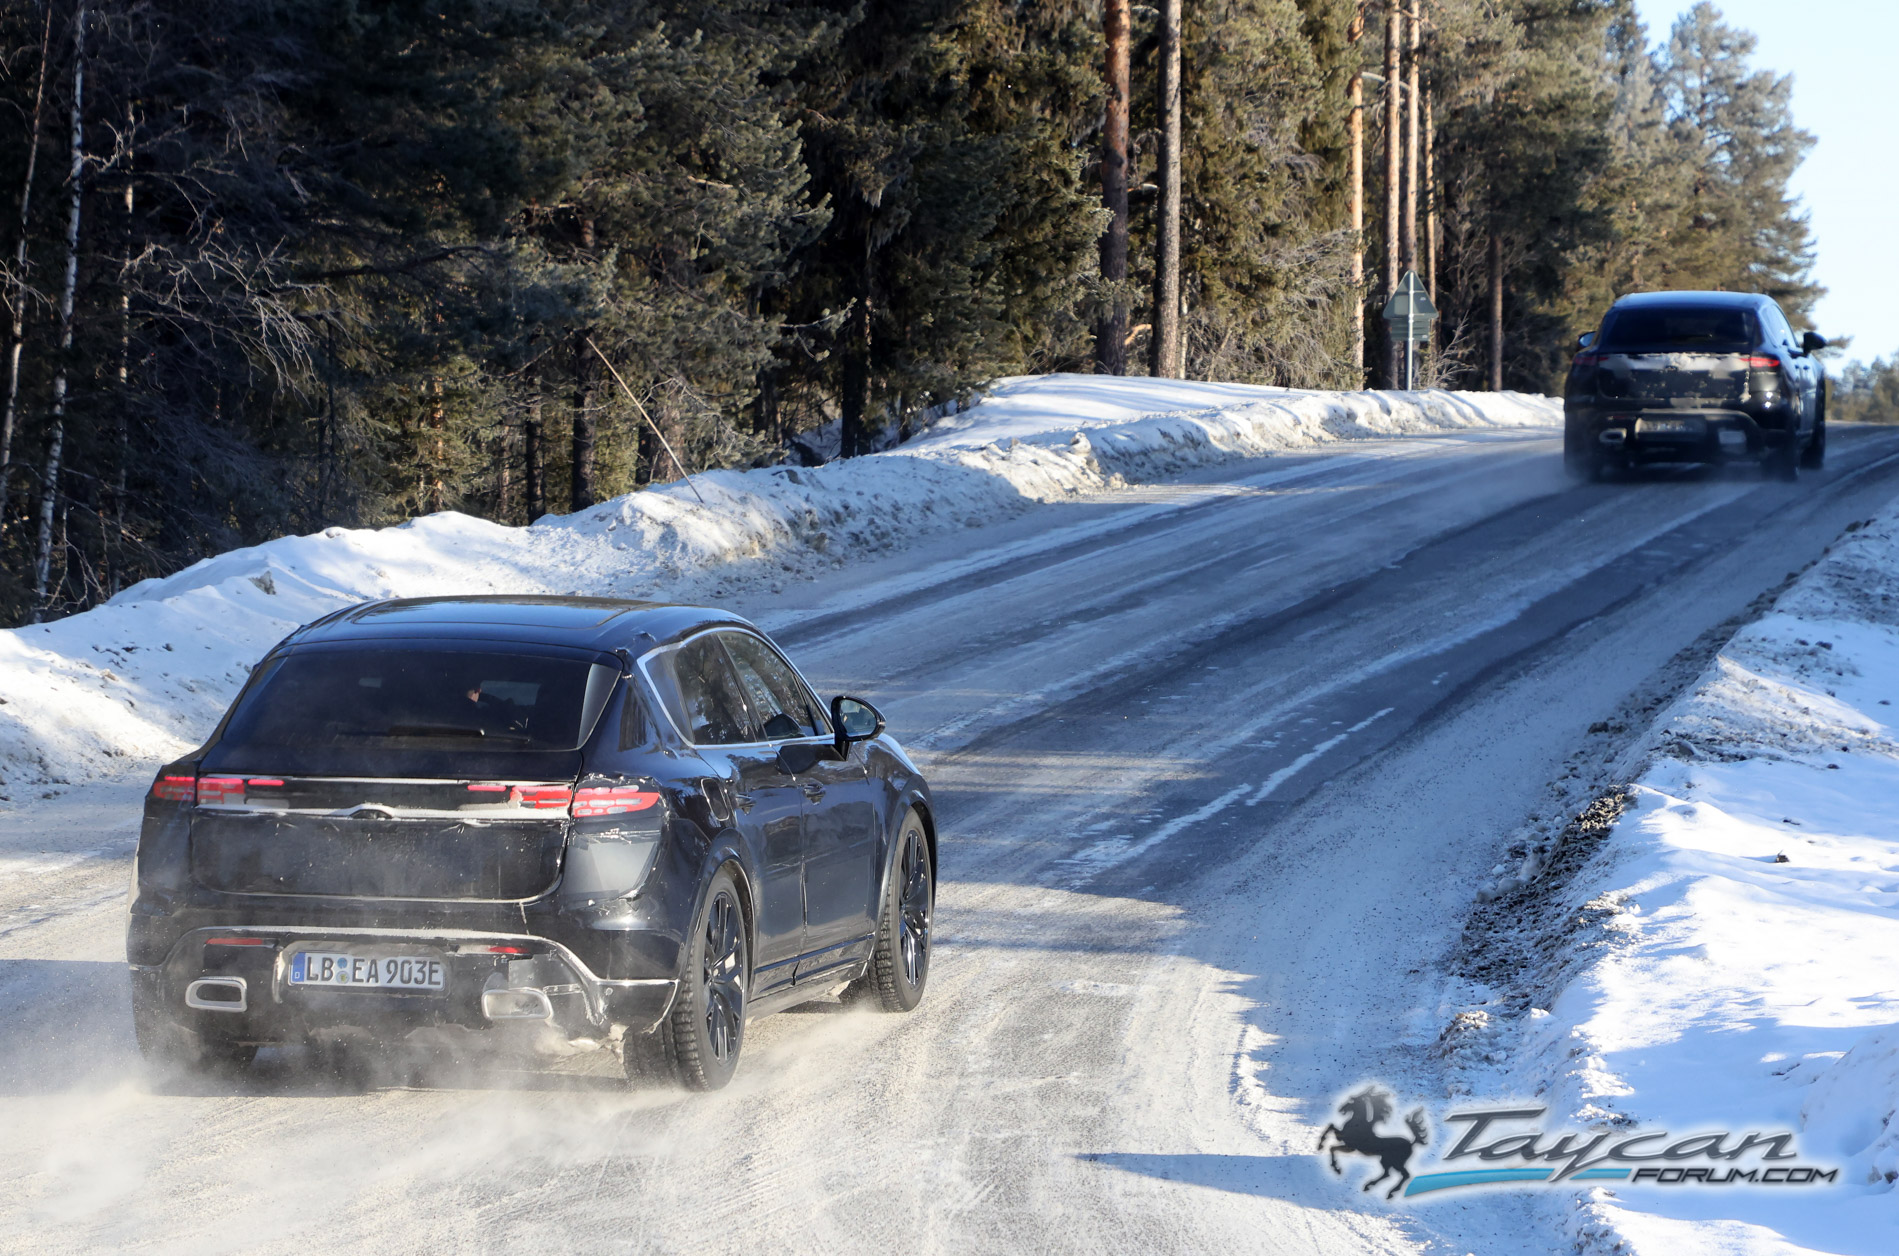 Macan EV Macan EV Interior Spied Uncovered! + Latest Cold Climate Testing Photos Porsche Macan 18